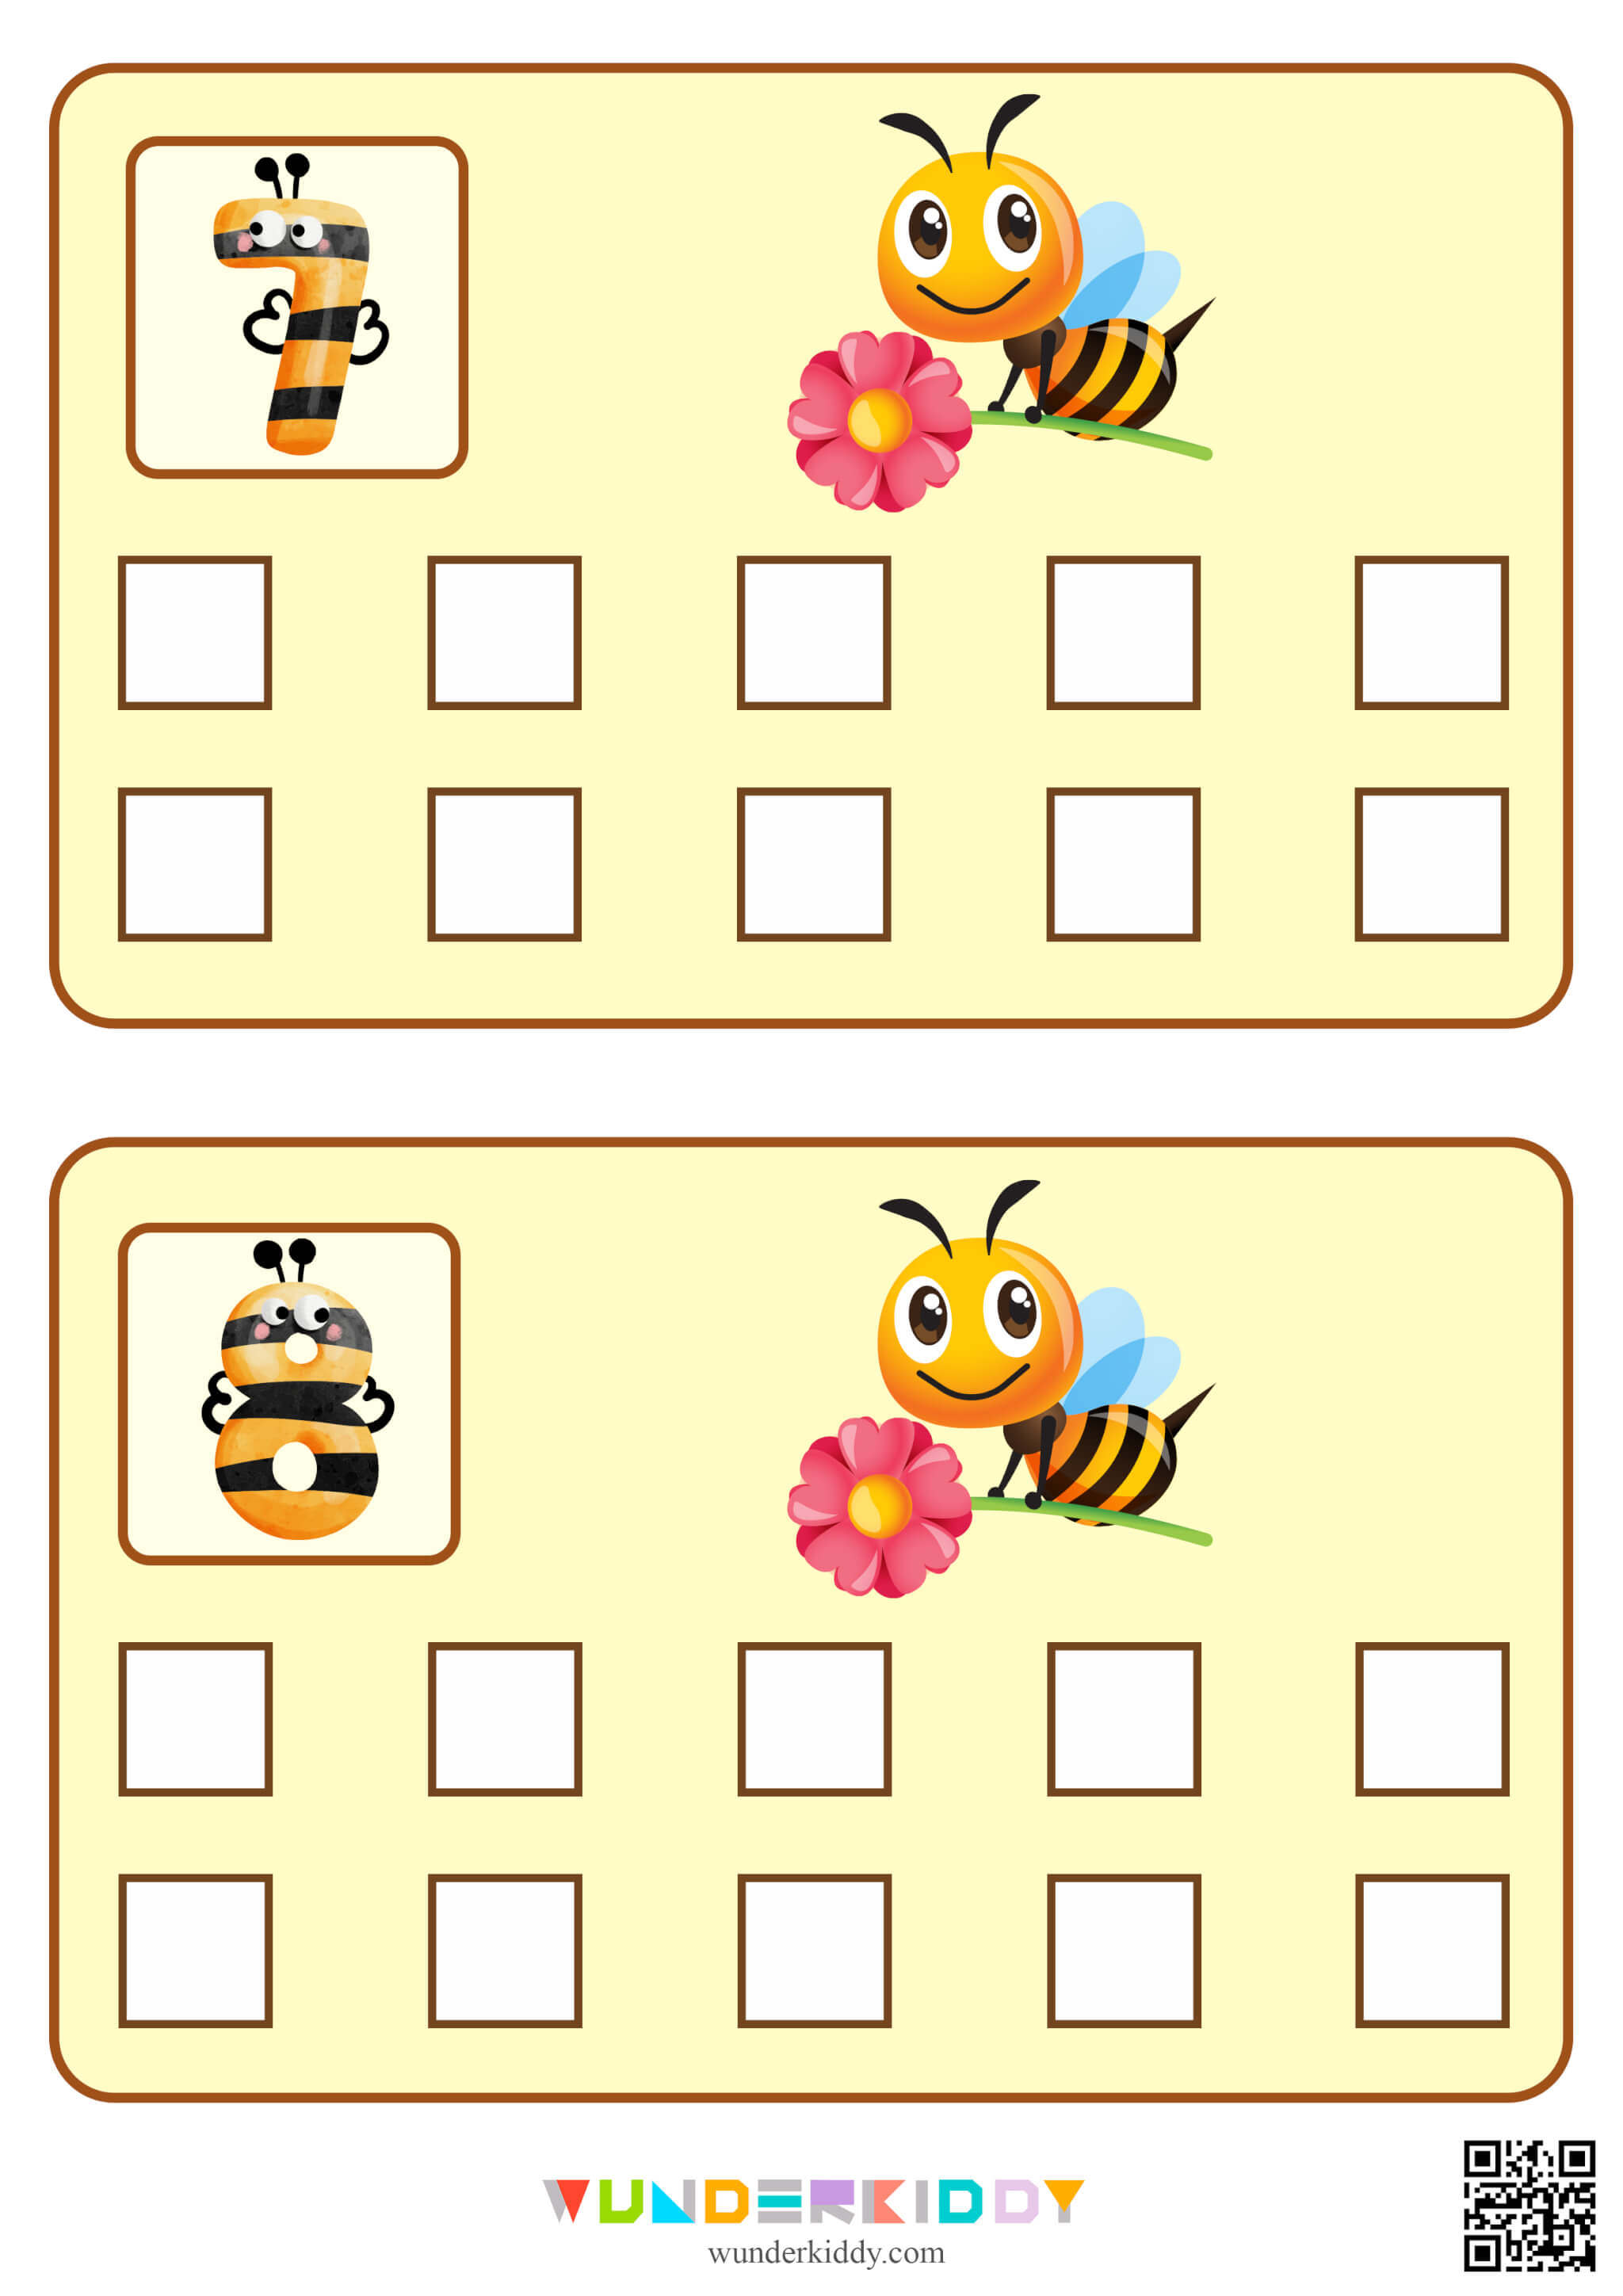 Flashcards to Practice Counting How Many Bees? - Image 5